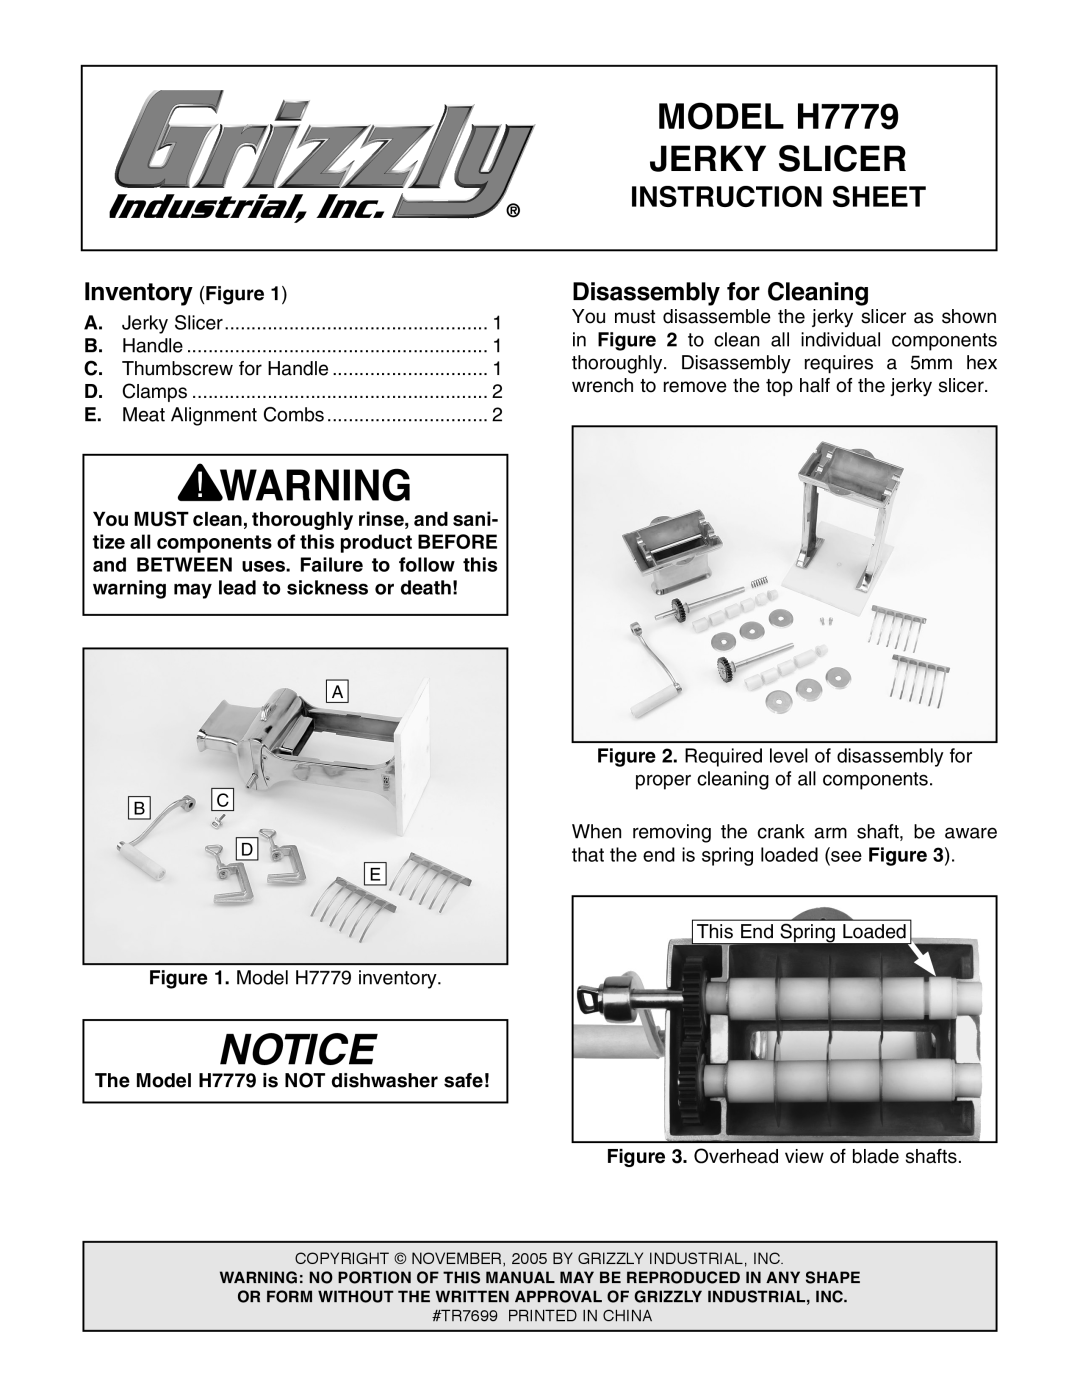 Grizzly instruction sheet Inventory Figure, Disassembly for Cleaning, MODEL H7779, Jerky Slicer, Instruction Sheet 